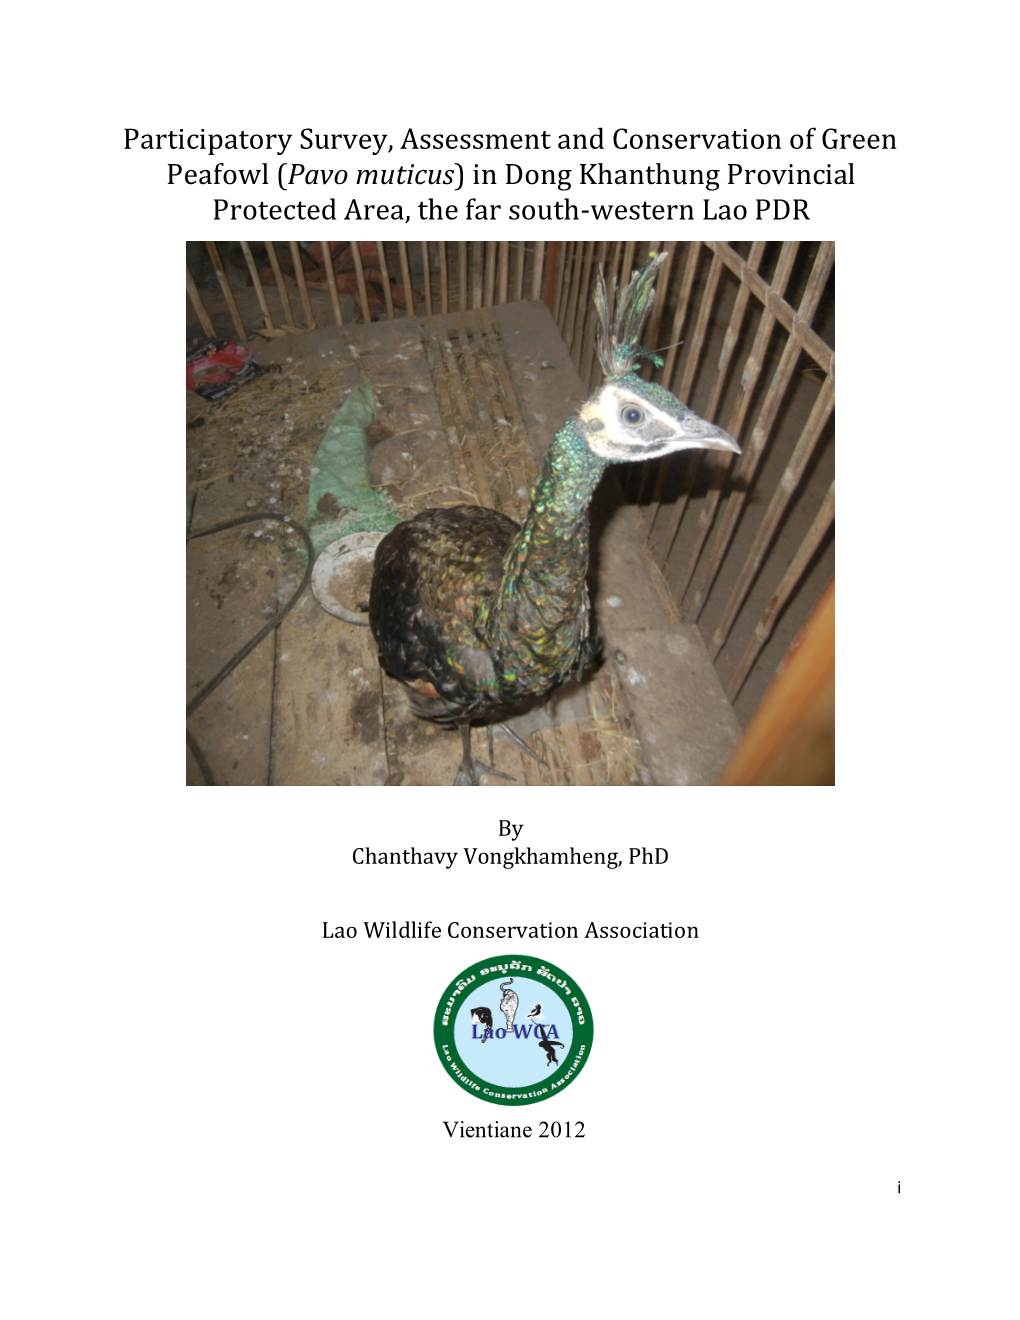 Participatory Survey, Assessment and Conservation of Green Peafowl (Pavo Muticus) in Dong Khanthung Provincial Protected Area, the Far South-Western Lao PDR